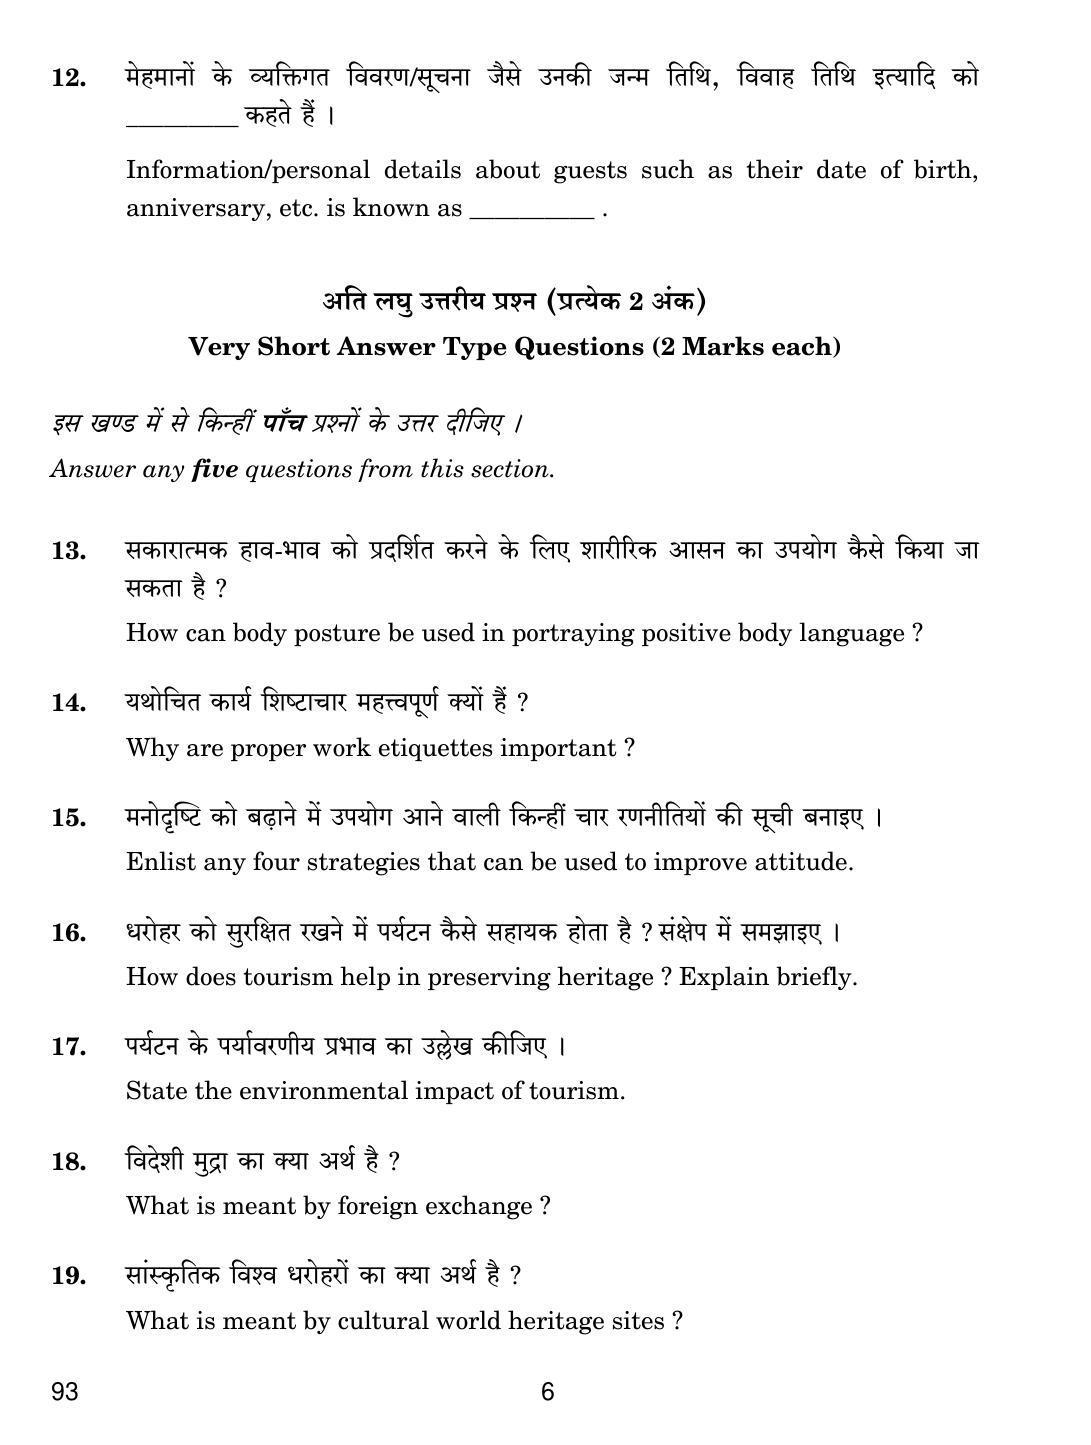 CBSE Class 10 93 INTRODUCTION TO TOURISM 2019 Question Paper - Page 6